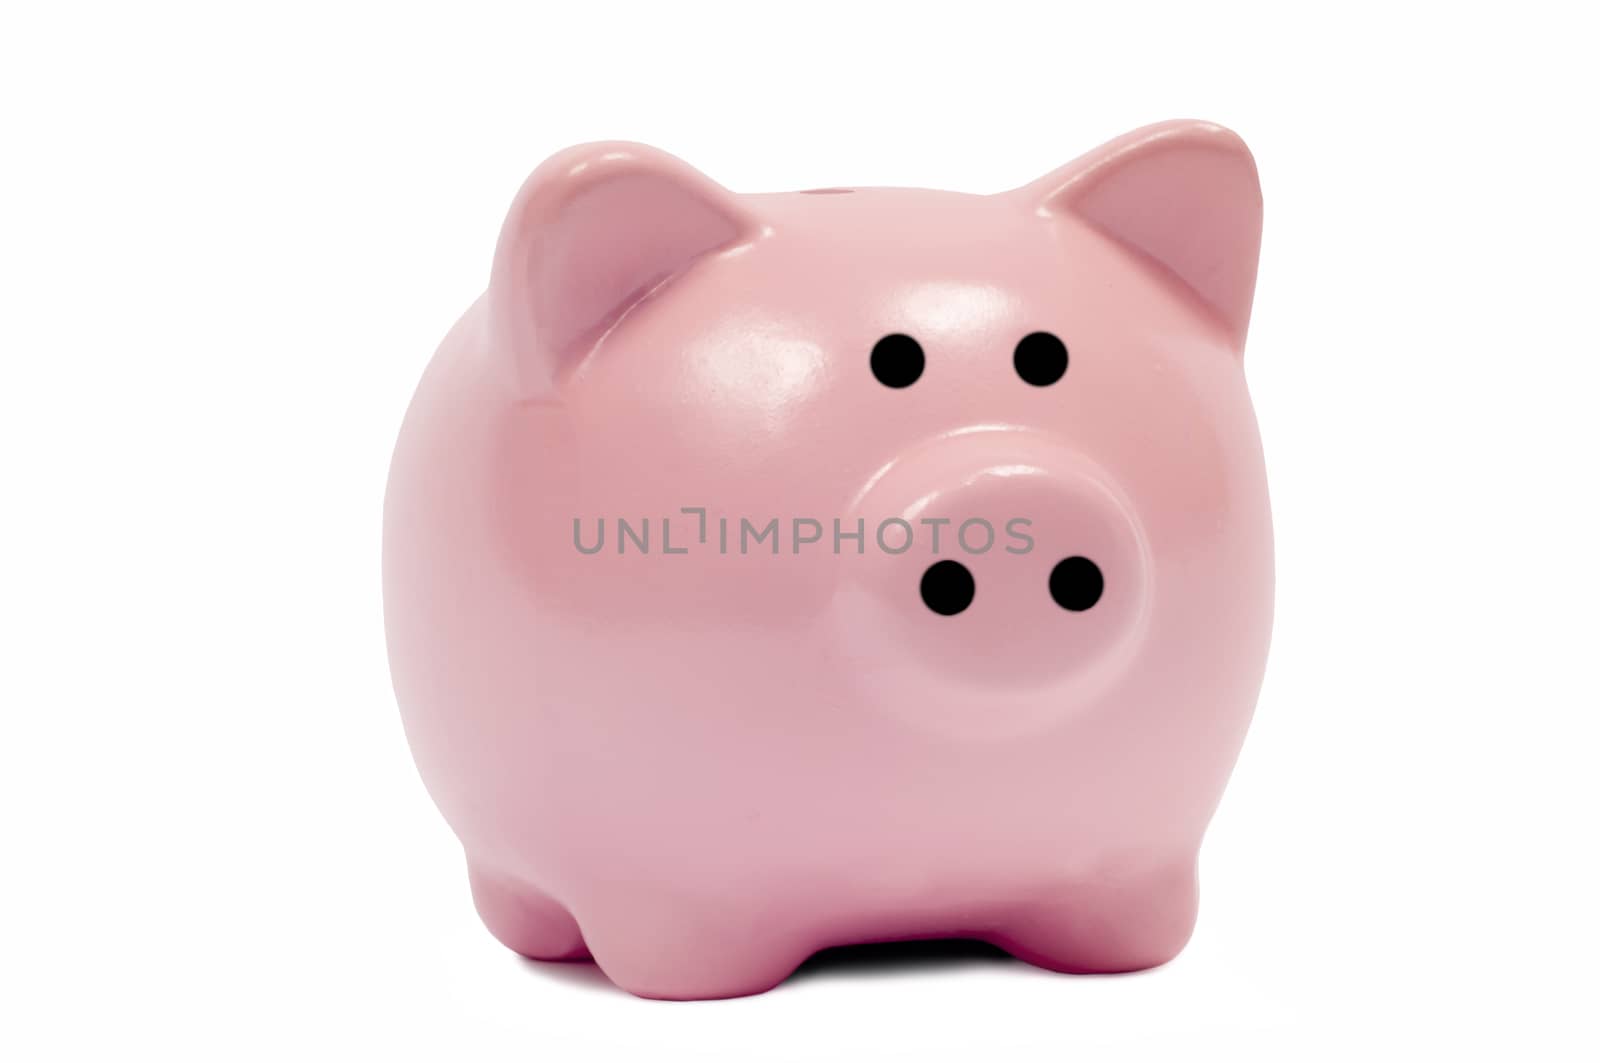 Small Pink Piggy Bank Isolated On White by stockbuster1